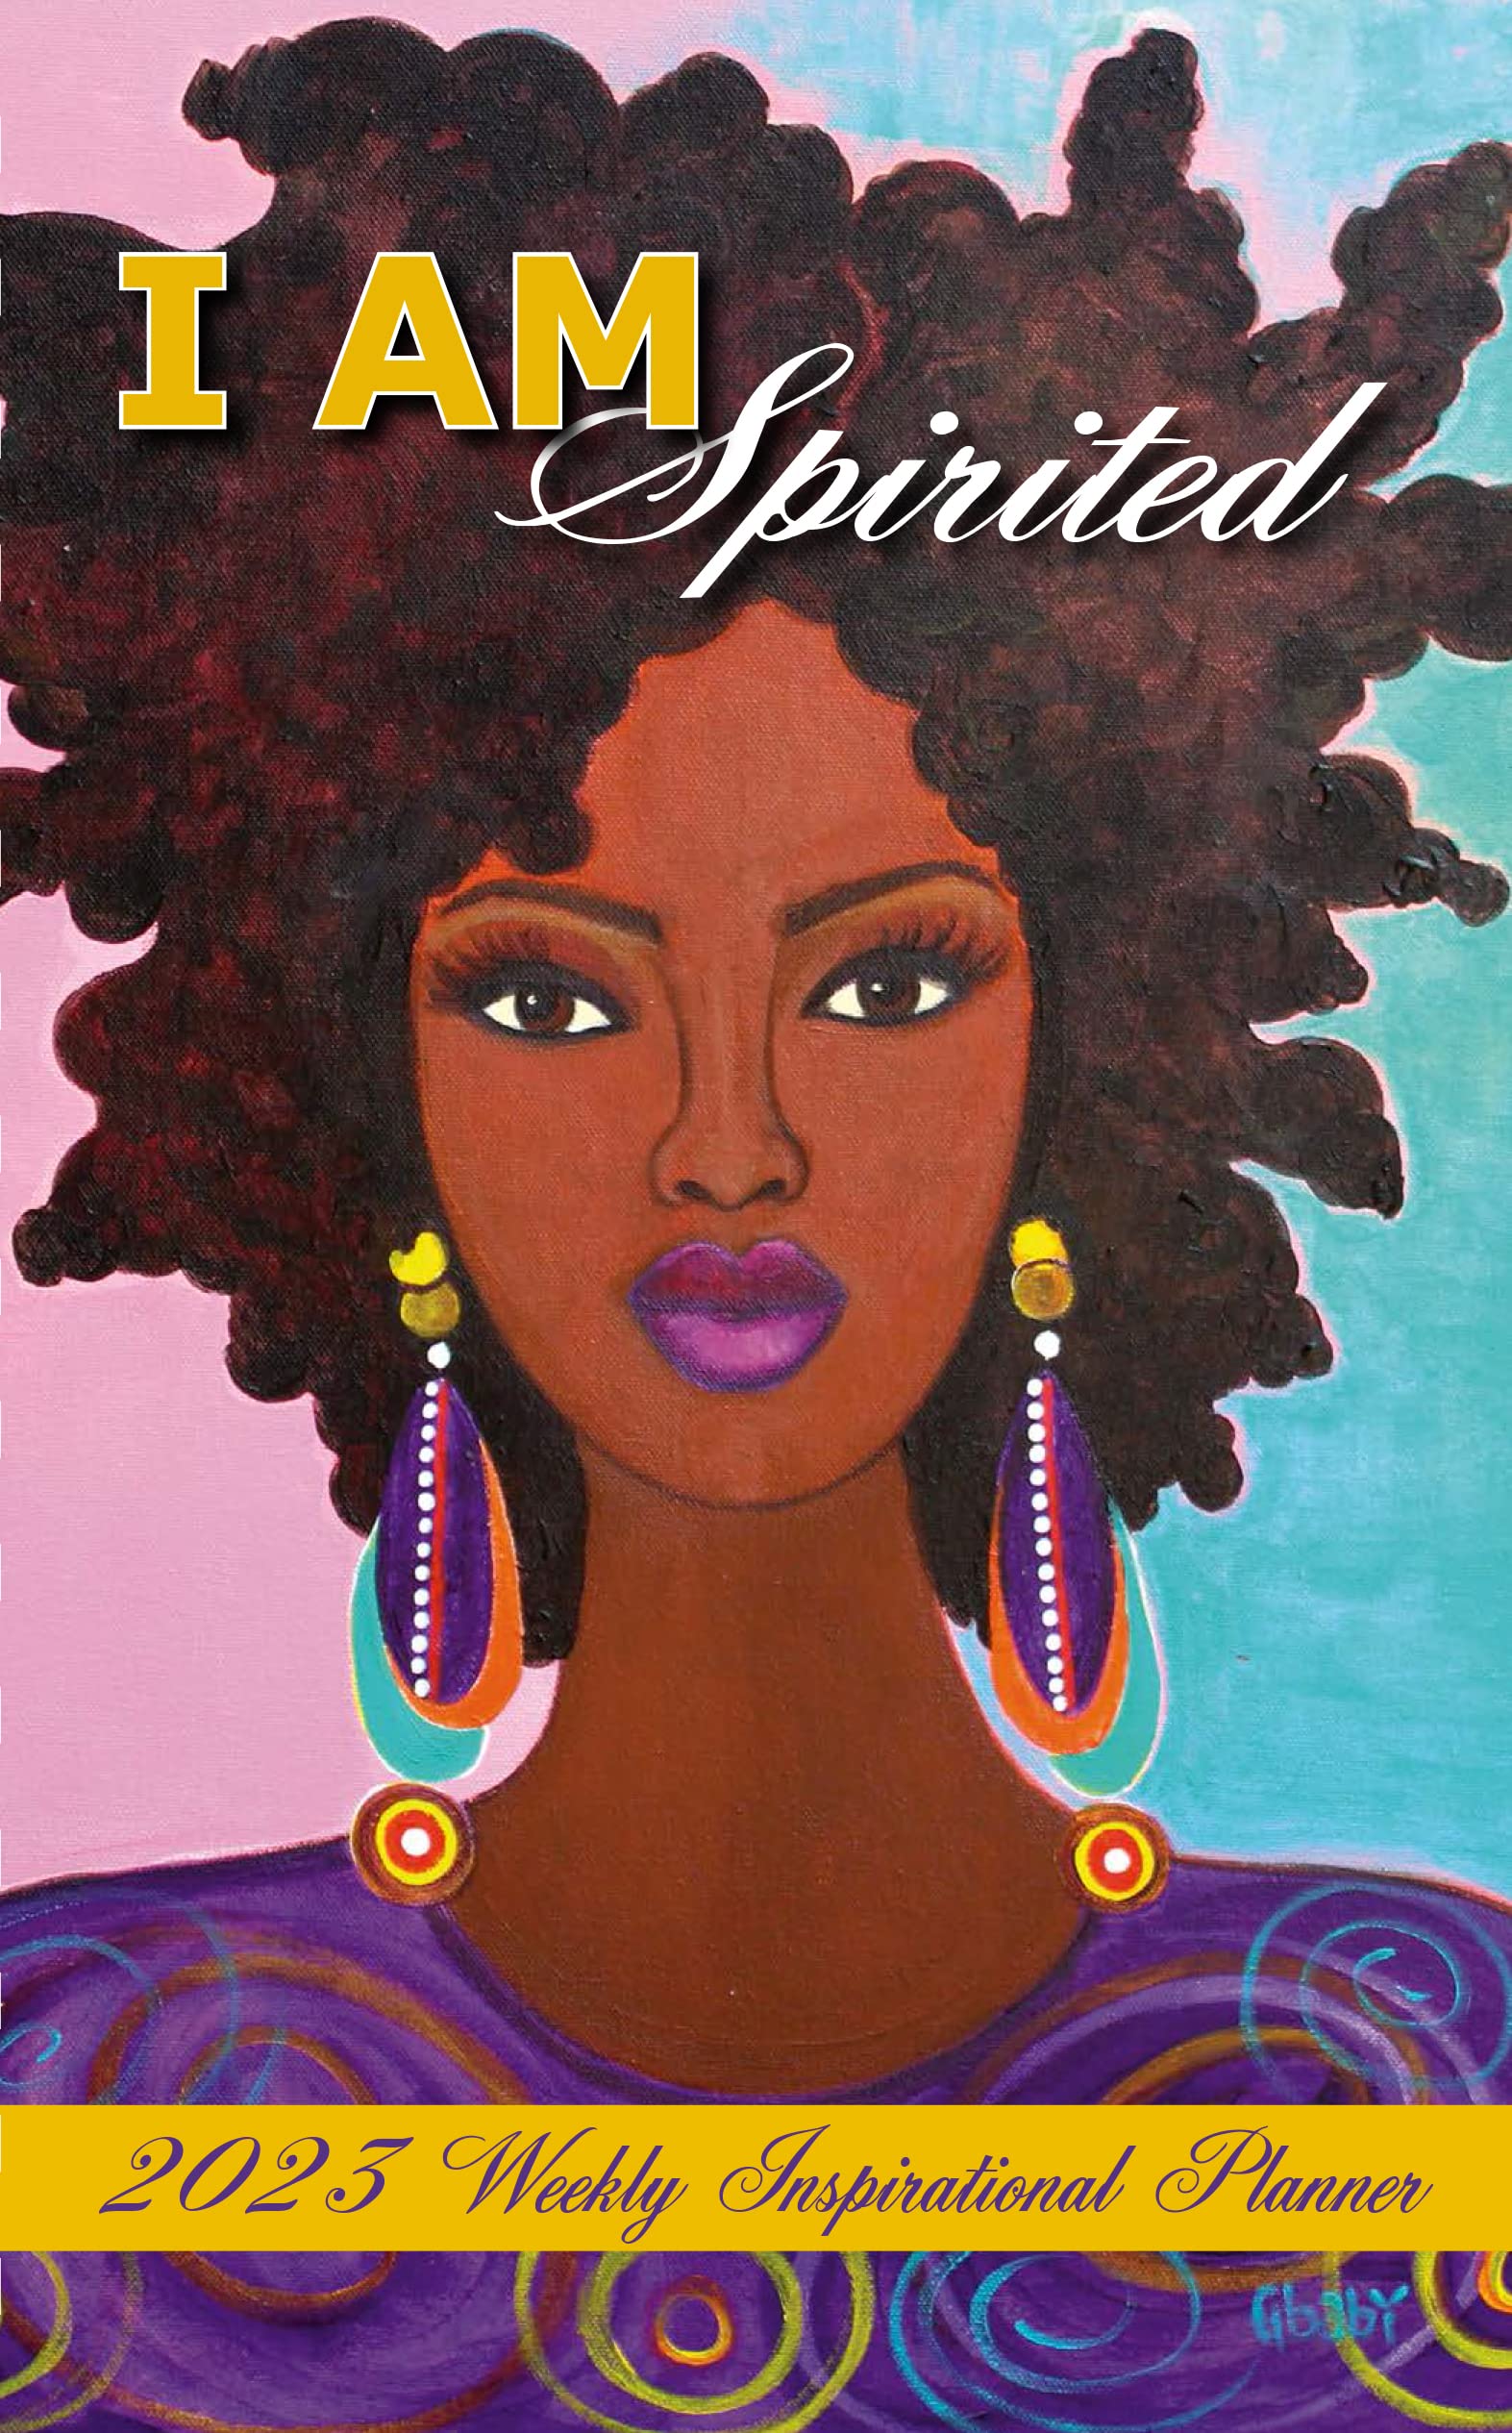 Shades of Color 2023 African American Weekly Planner, Shades of Color: I Am Spirited, Highlighting Black Culture Through Beautiful Art, 5.375 x 8.375 inches, Artist: Sylvia "Gbaby" Phillips (IP35)